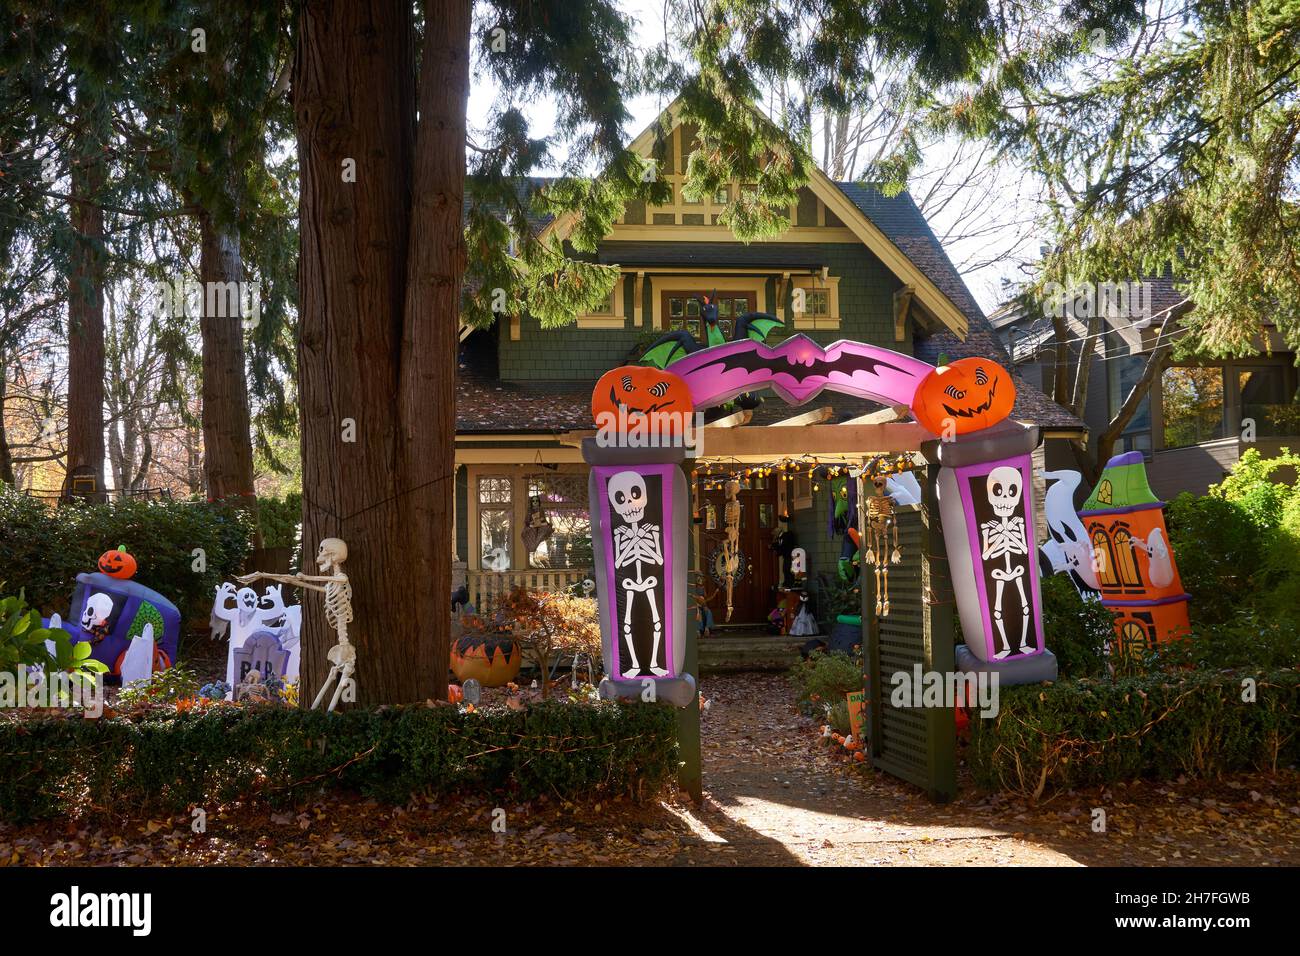 Halloween decorations in the front yard of a house Stock Photo